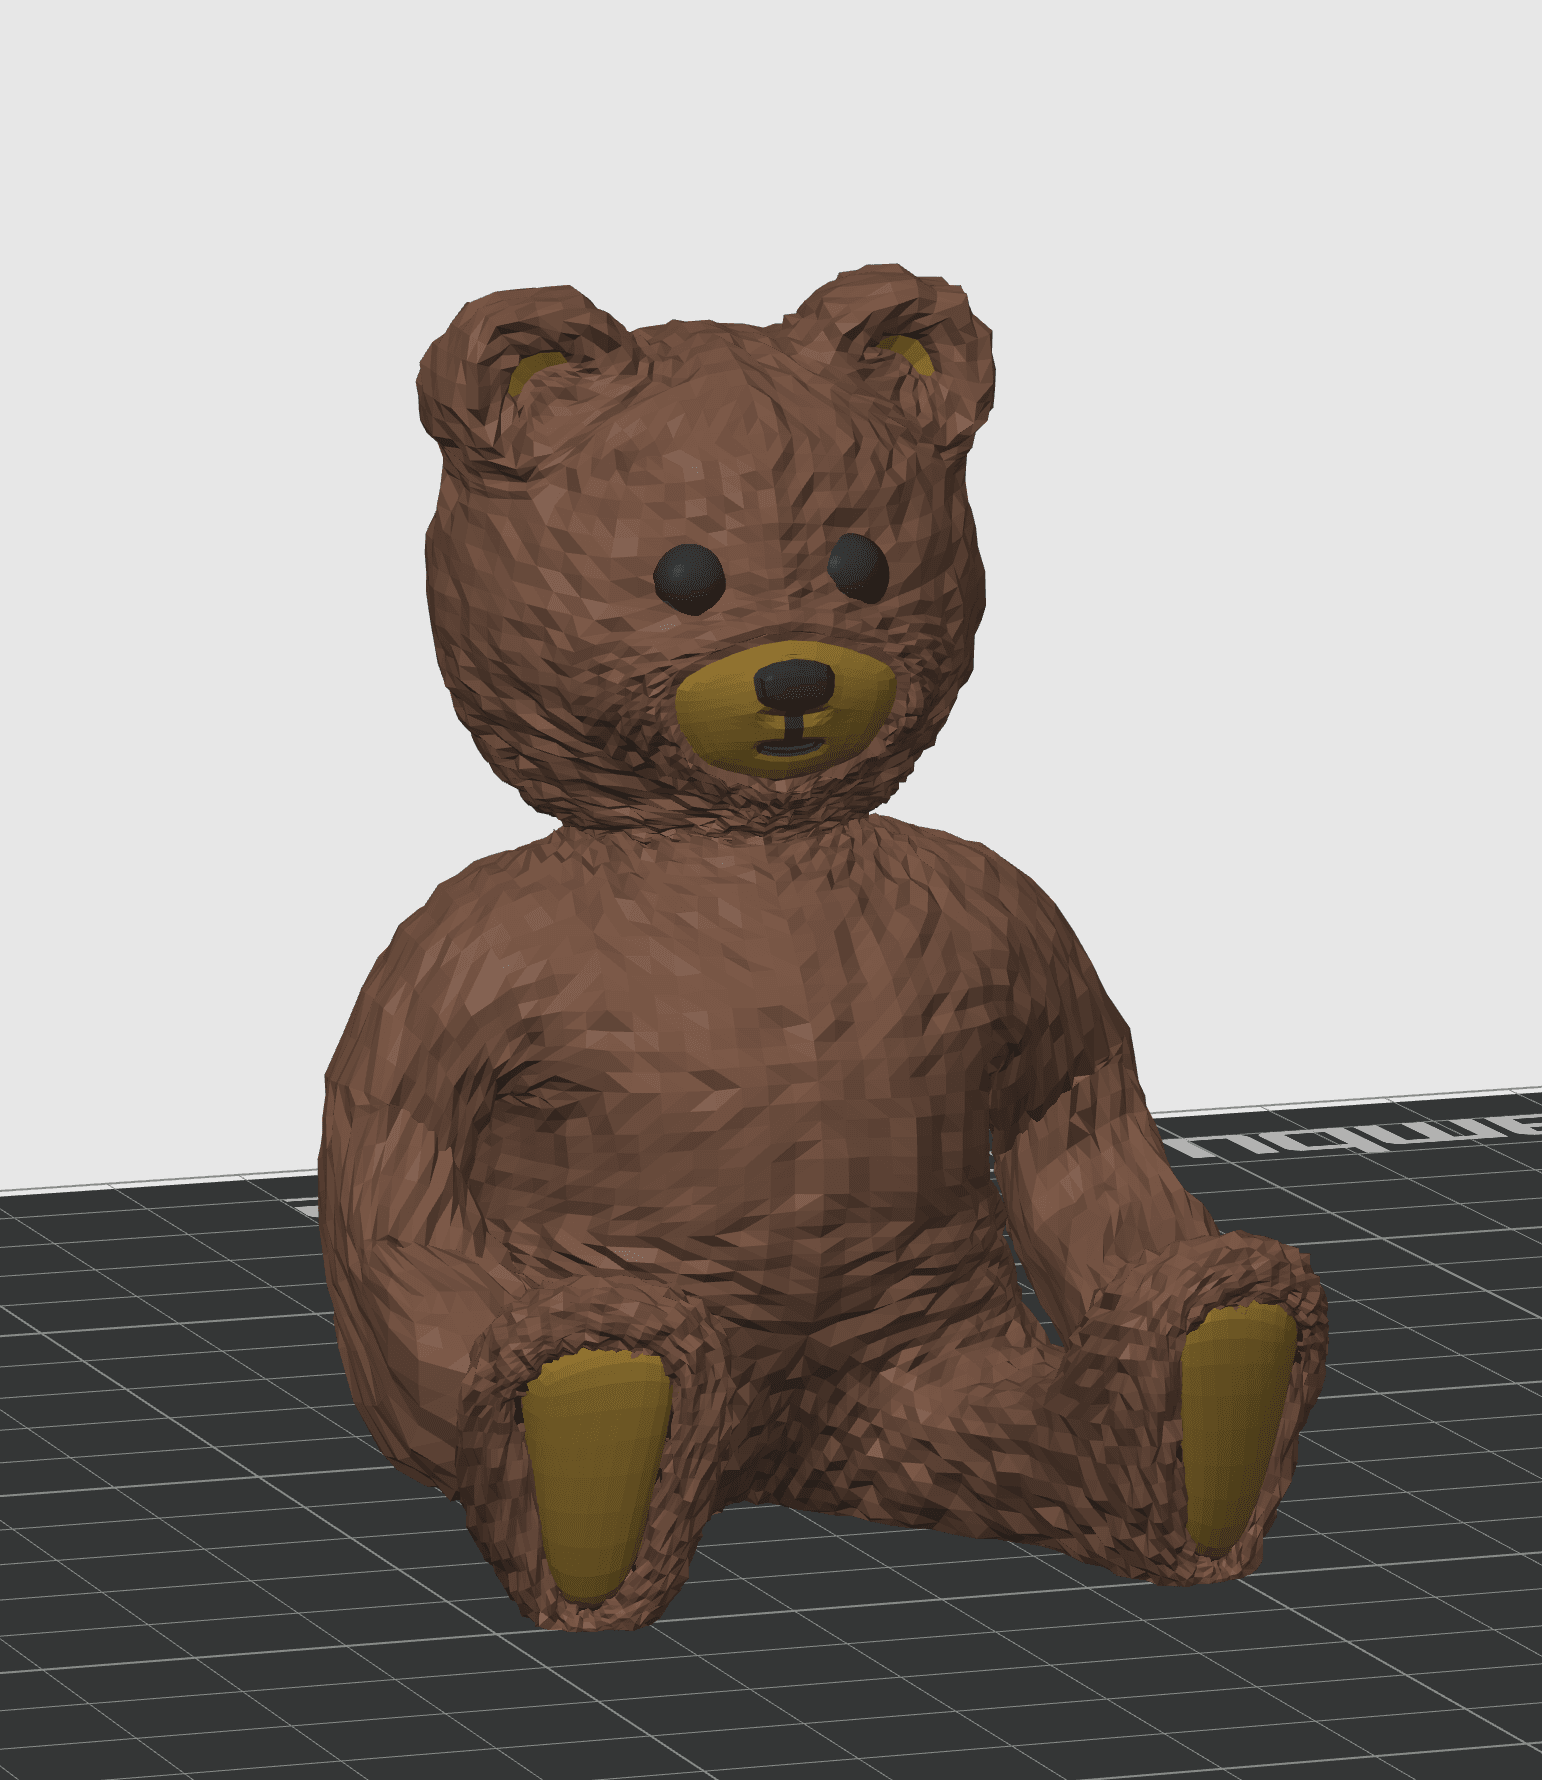 Render from Bambu Studio showing the color painted areas of the bear.